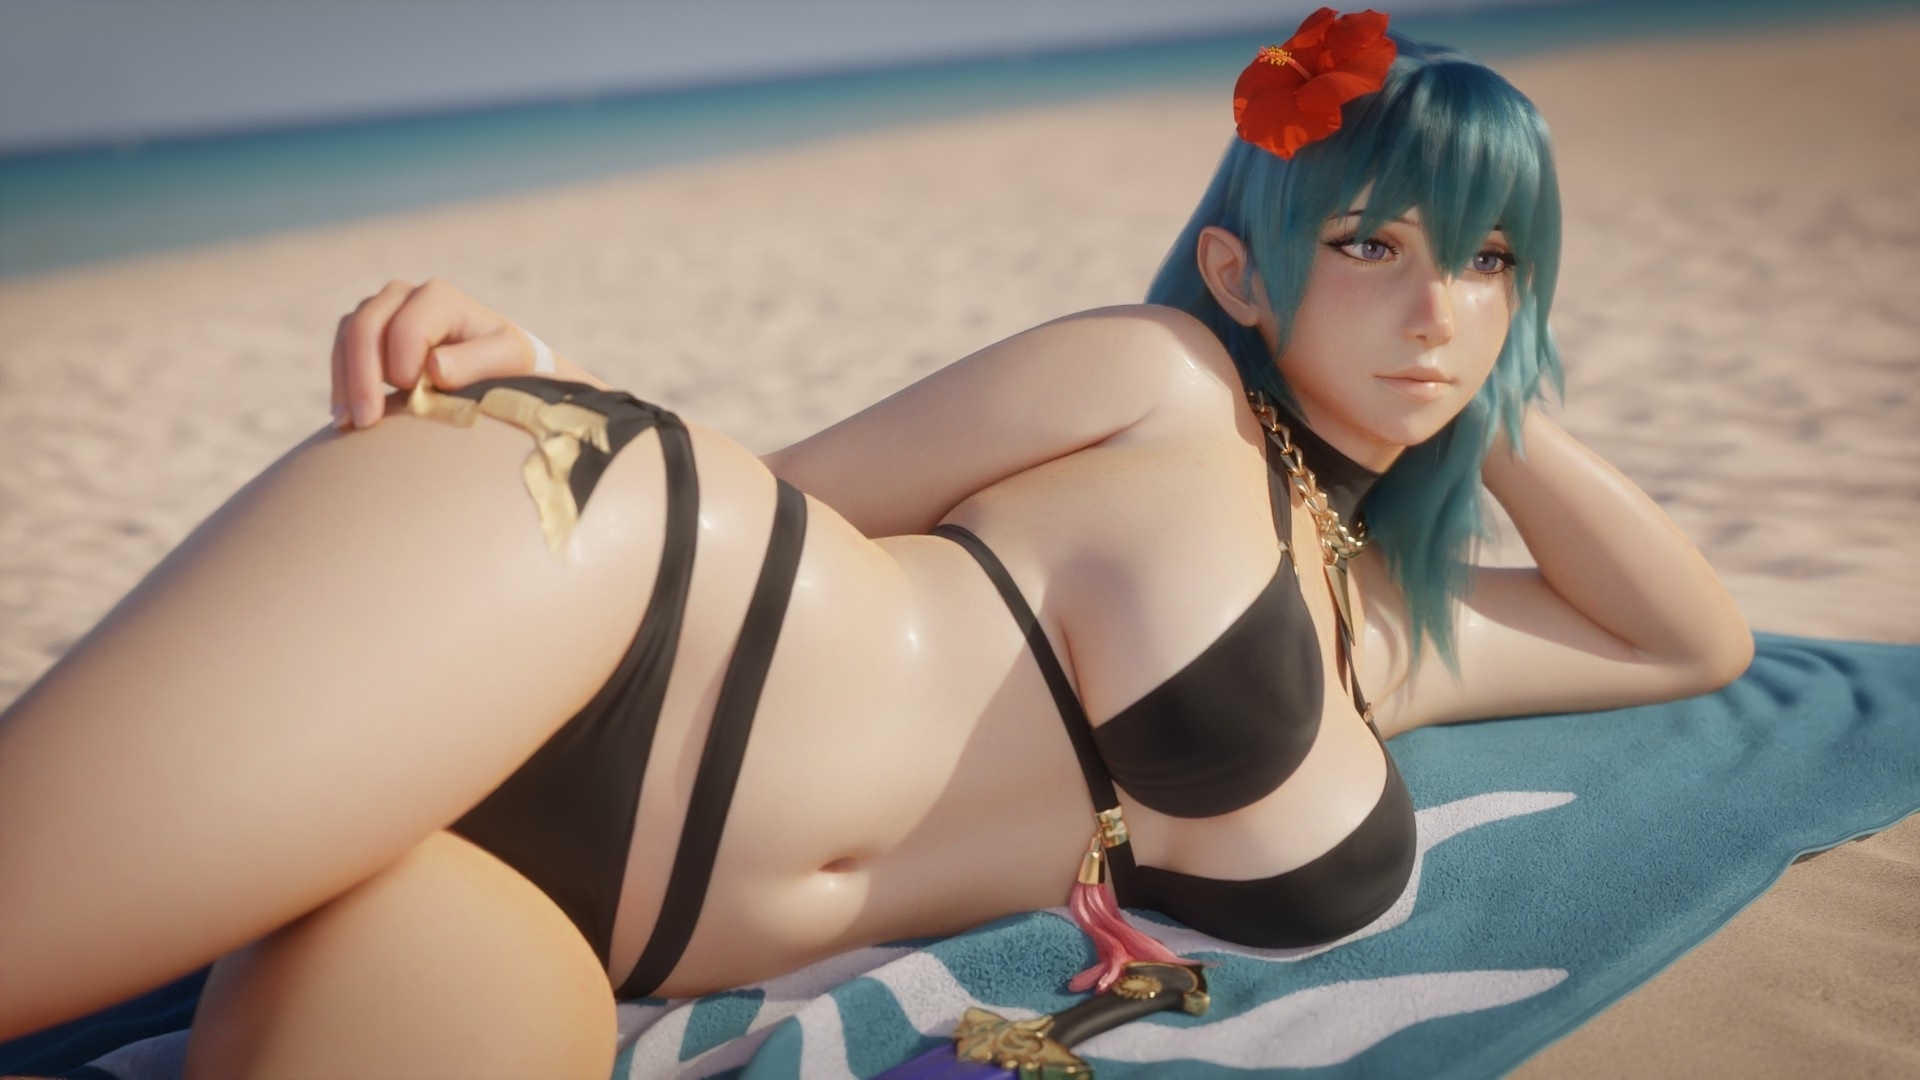 Byleth in bikini Byleth Fire Emblem Boobs Cleavage Sexy Hot Bikini Lingerie Naked Half Naked 3d Porn